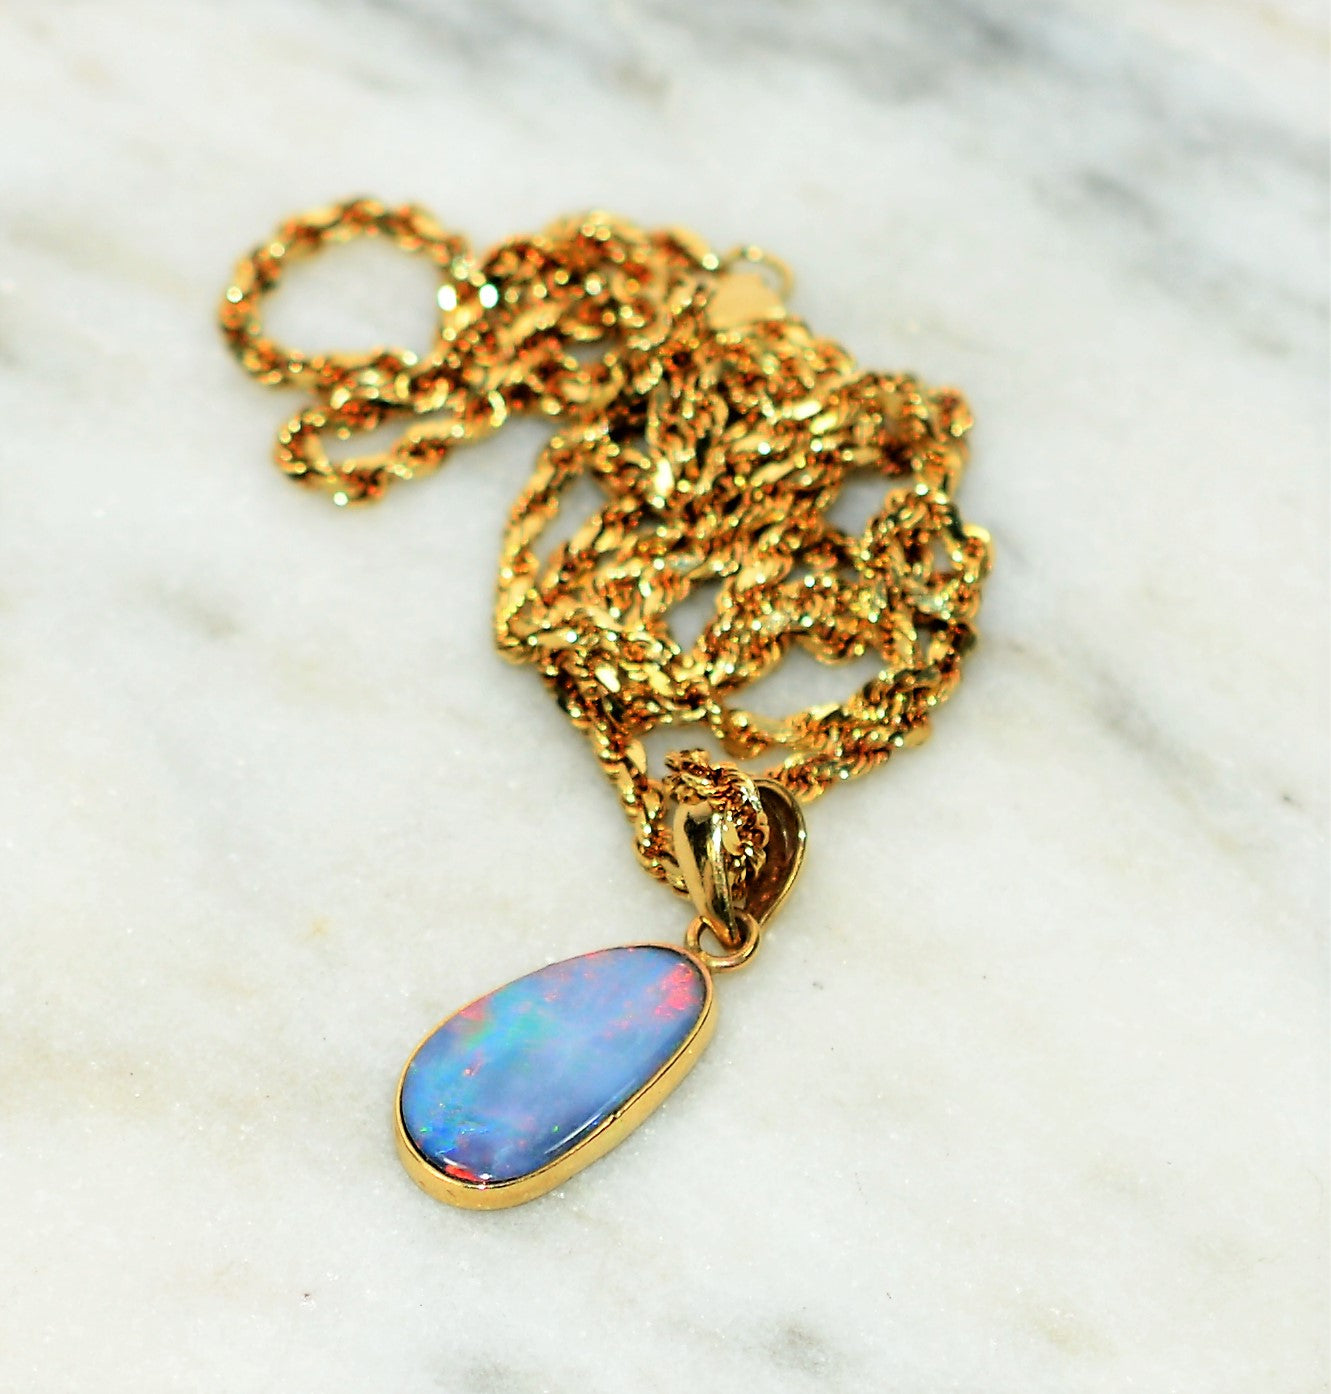 Natural Ethiopian Opal Necklace 14K Solid Gold 1.78ct Pendant Necklace October Birthstone Necklace Statement Women's Necklace Fine Jewelry